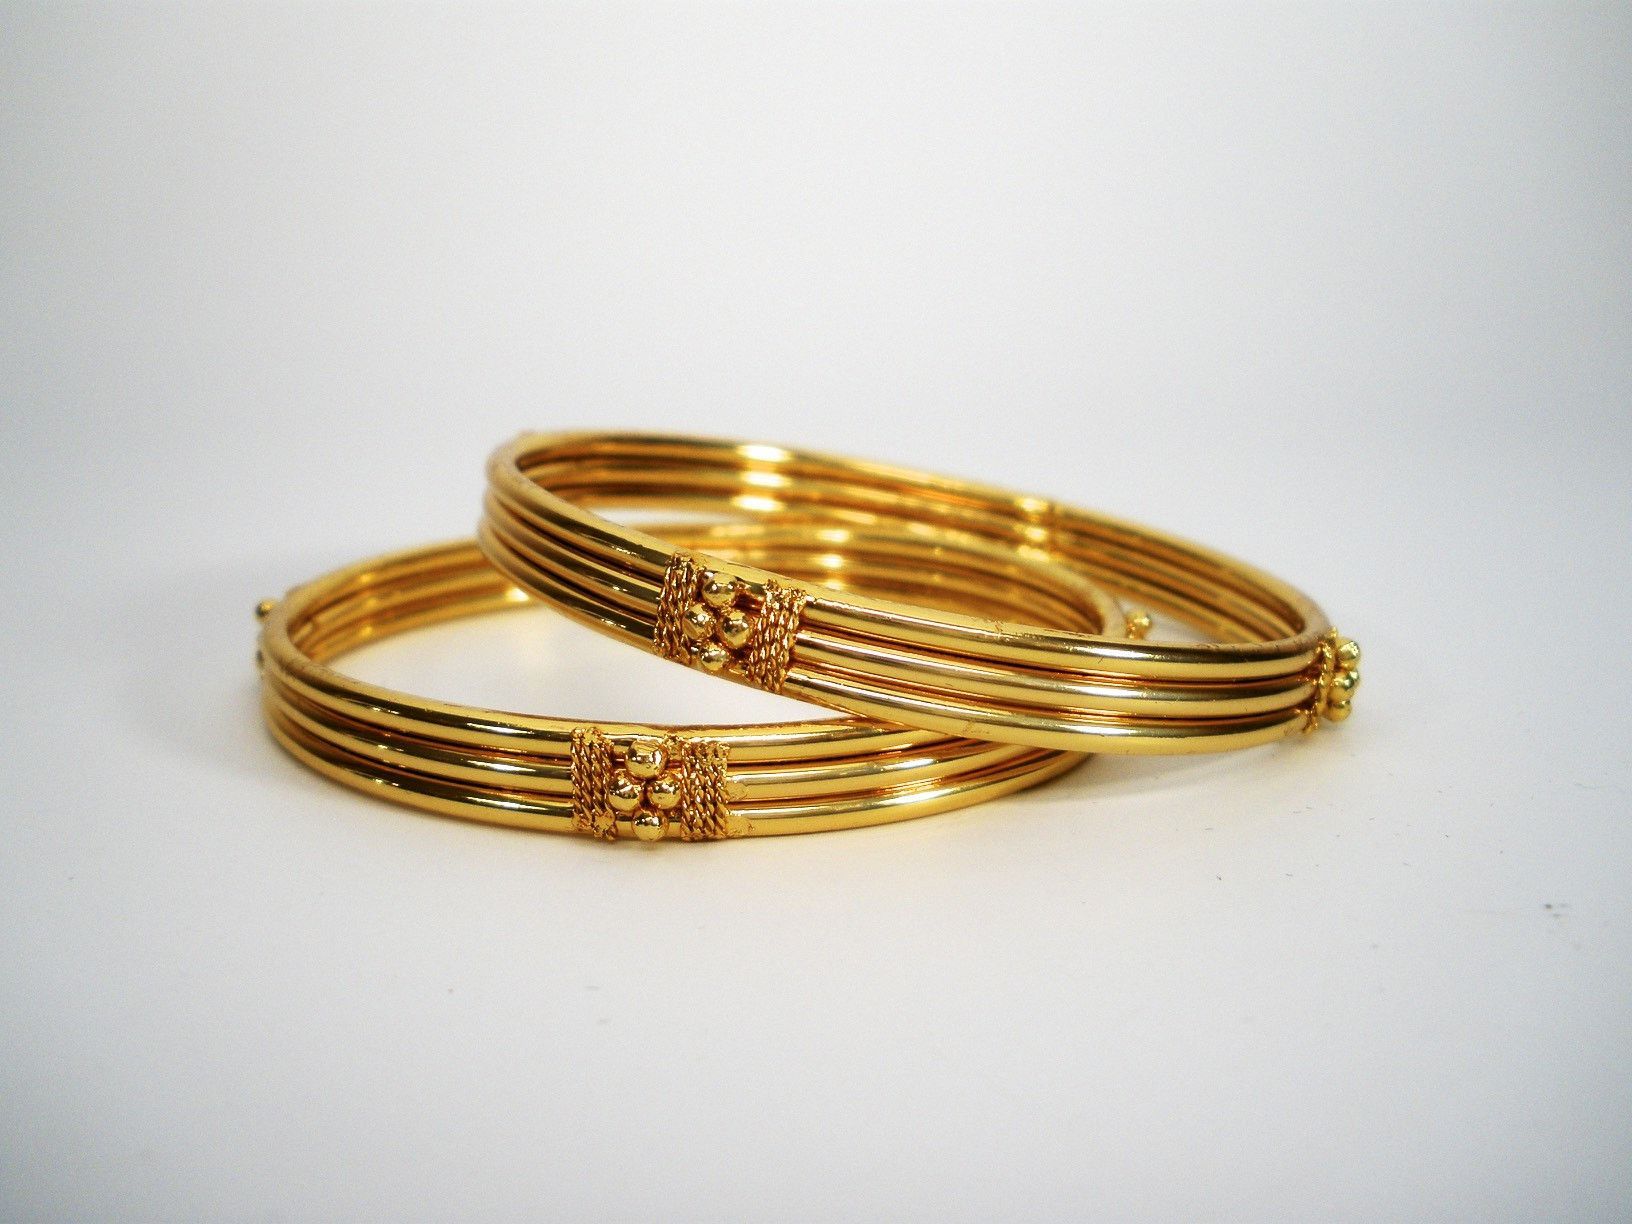 traditional gold bangles | Gold:jewellery n art pieces | Pinterest ...